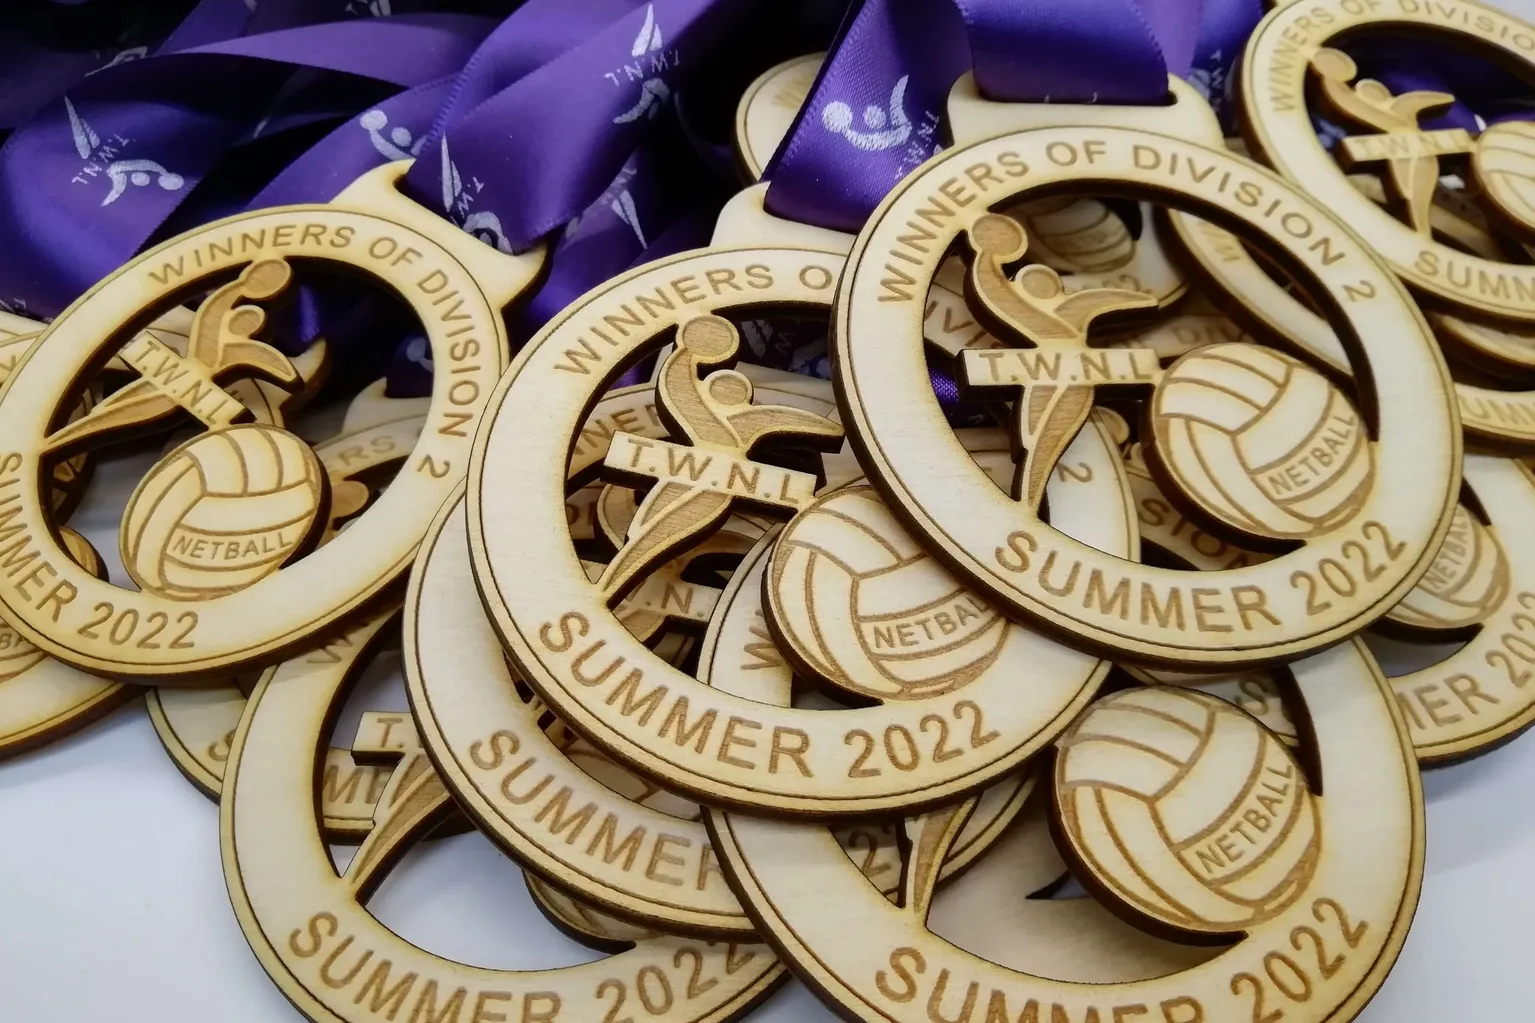 Customised volleyball medals on a purple ribbon.